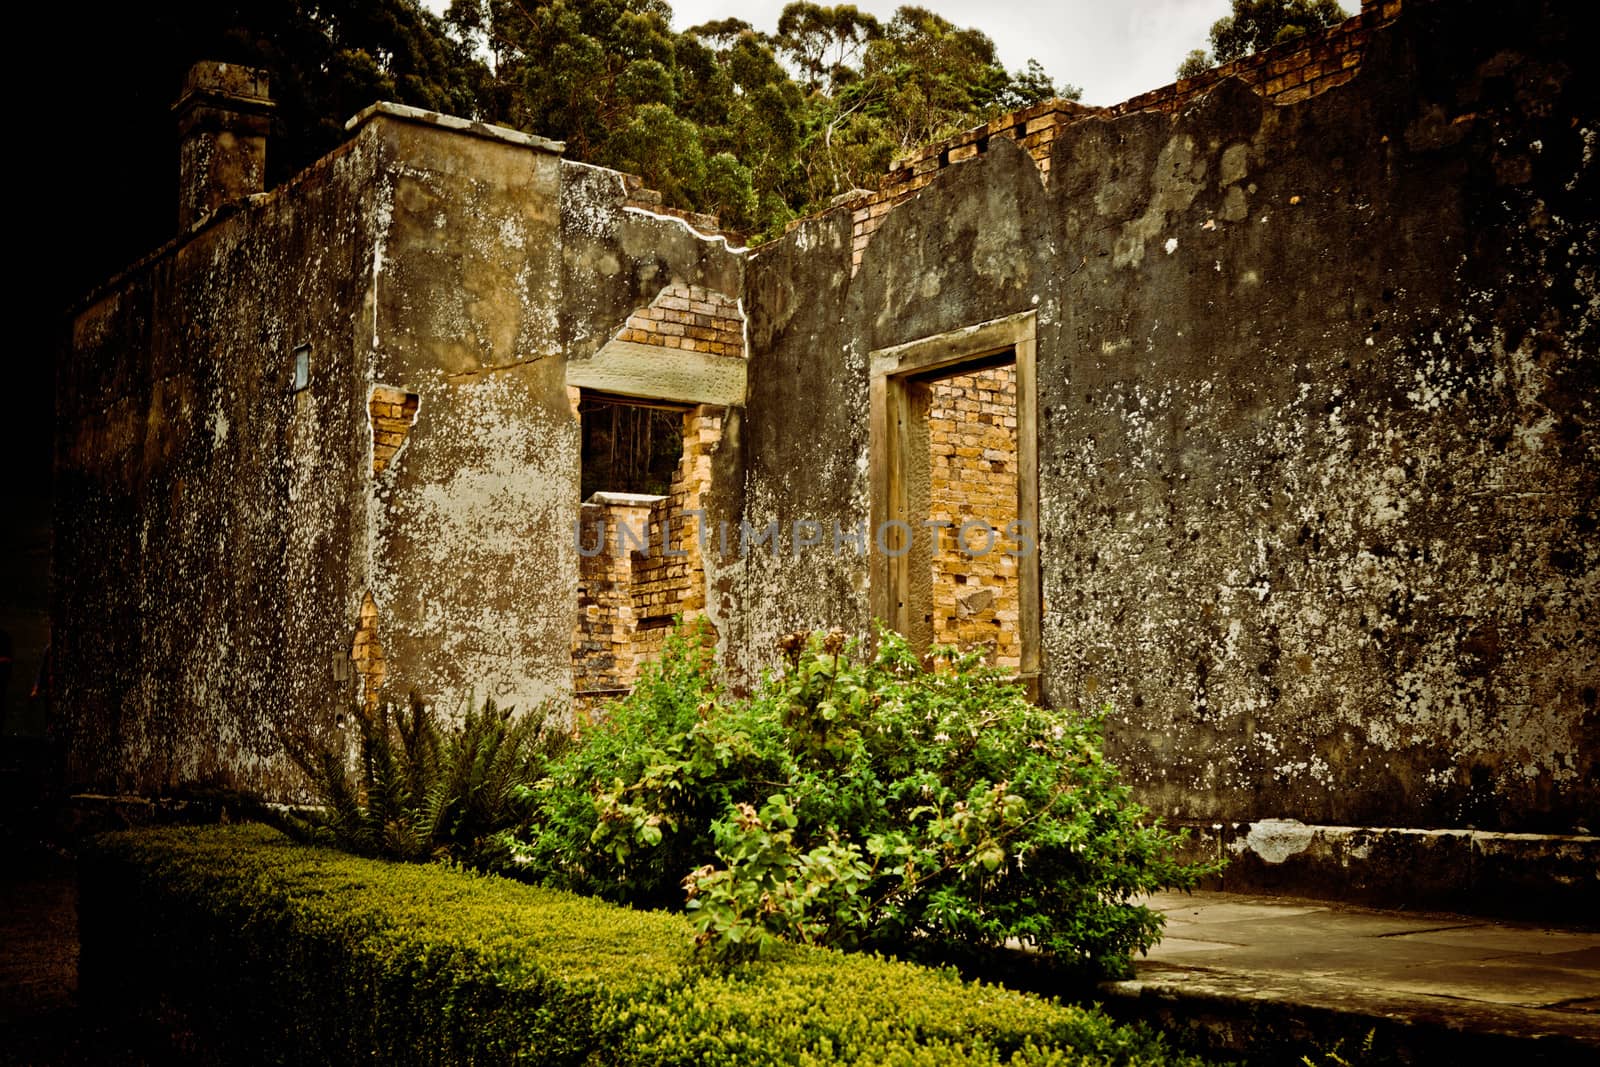 Facade of an old ruin surrounded by green vegetation